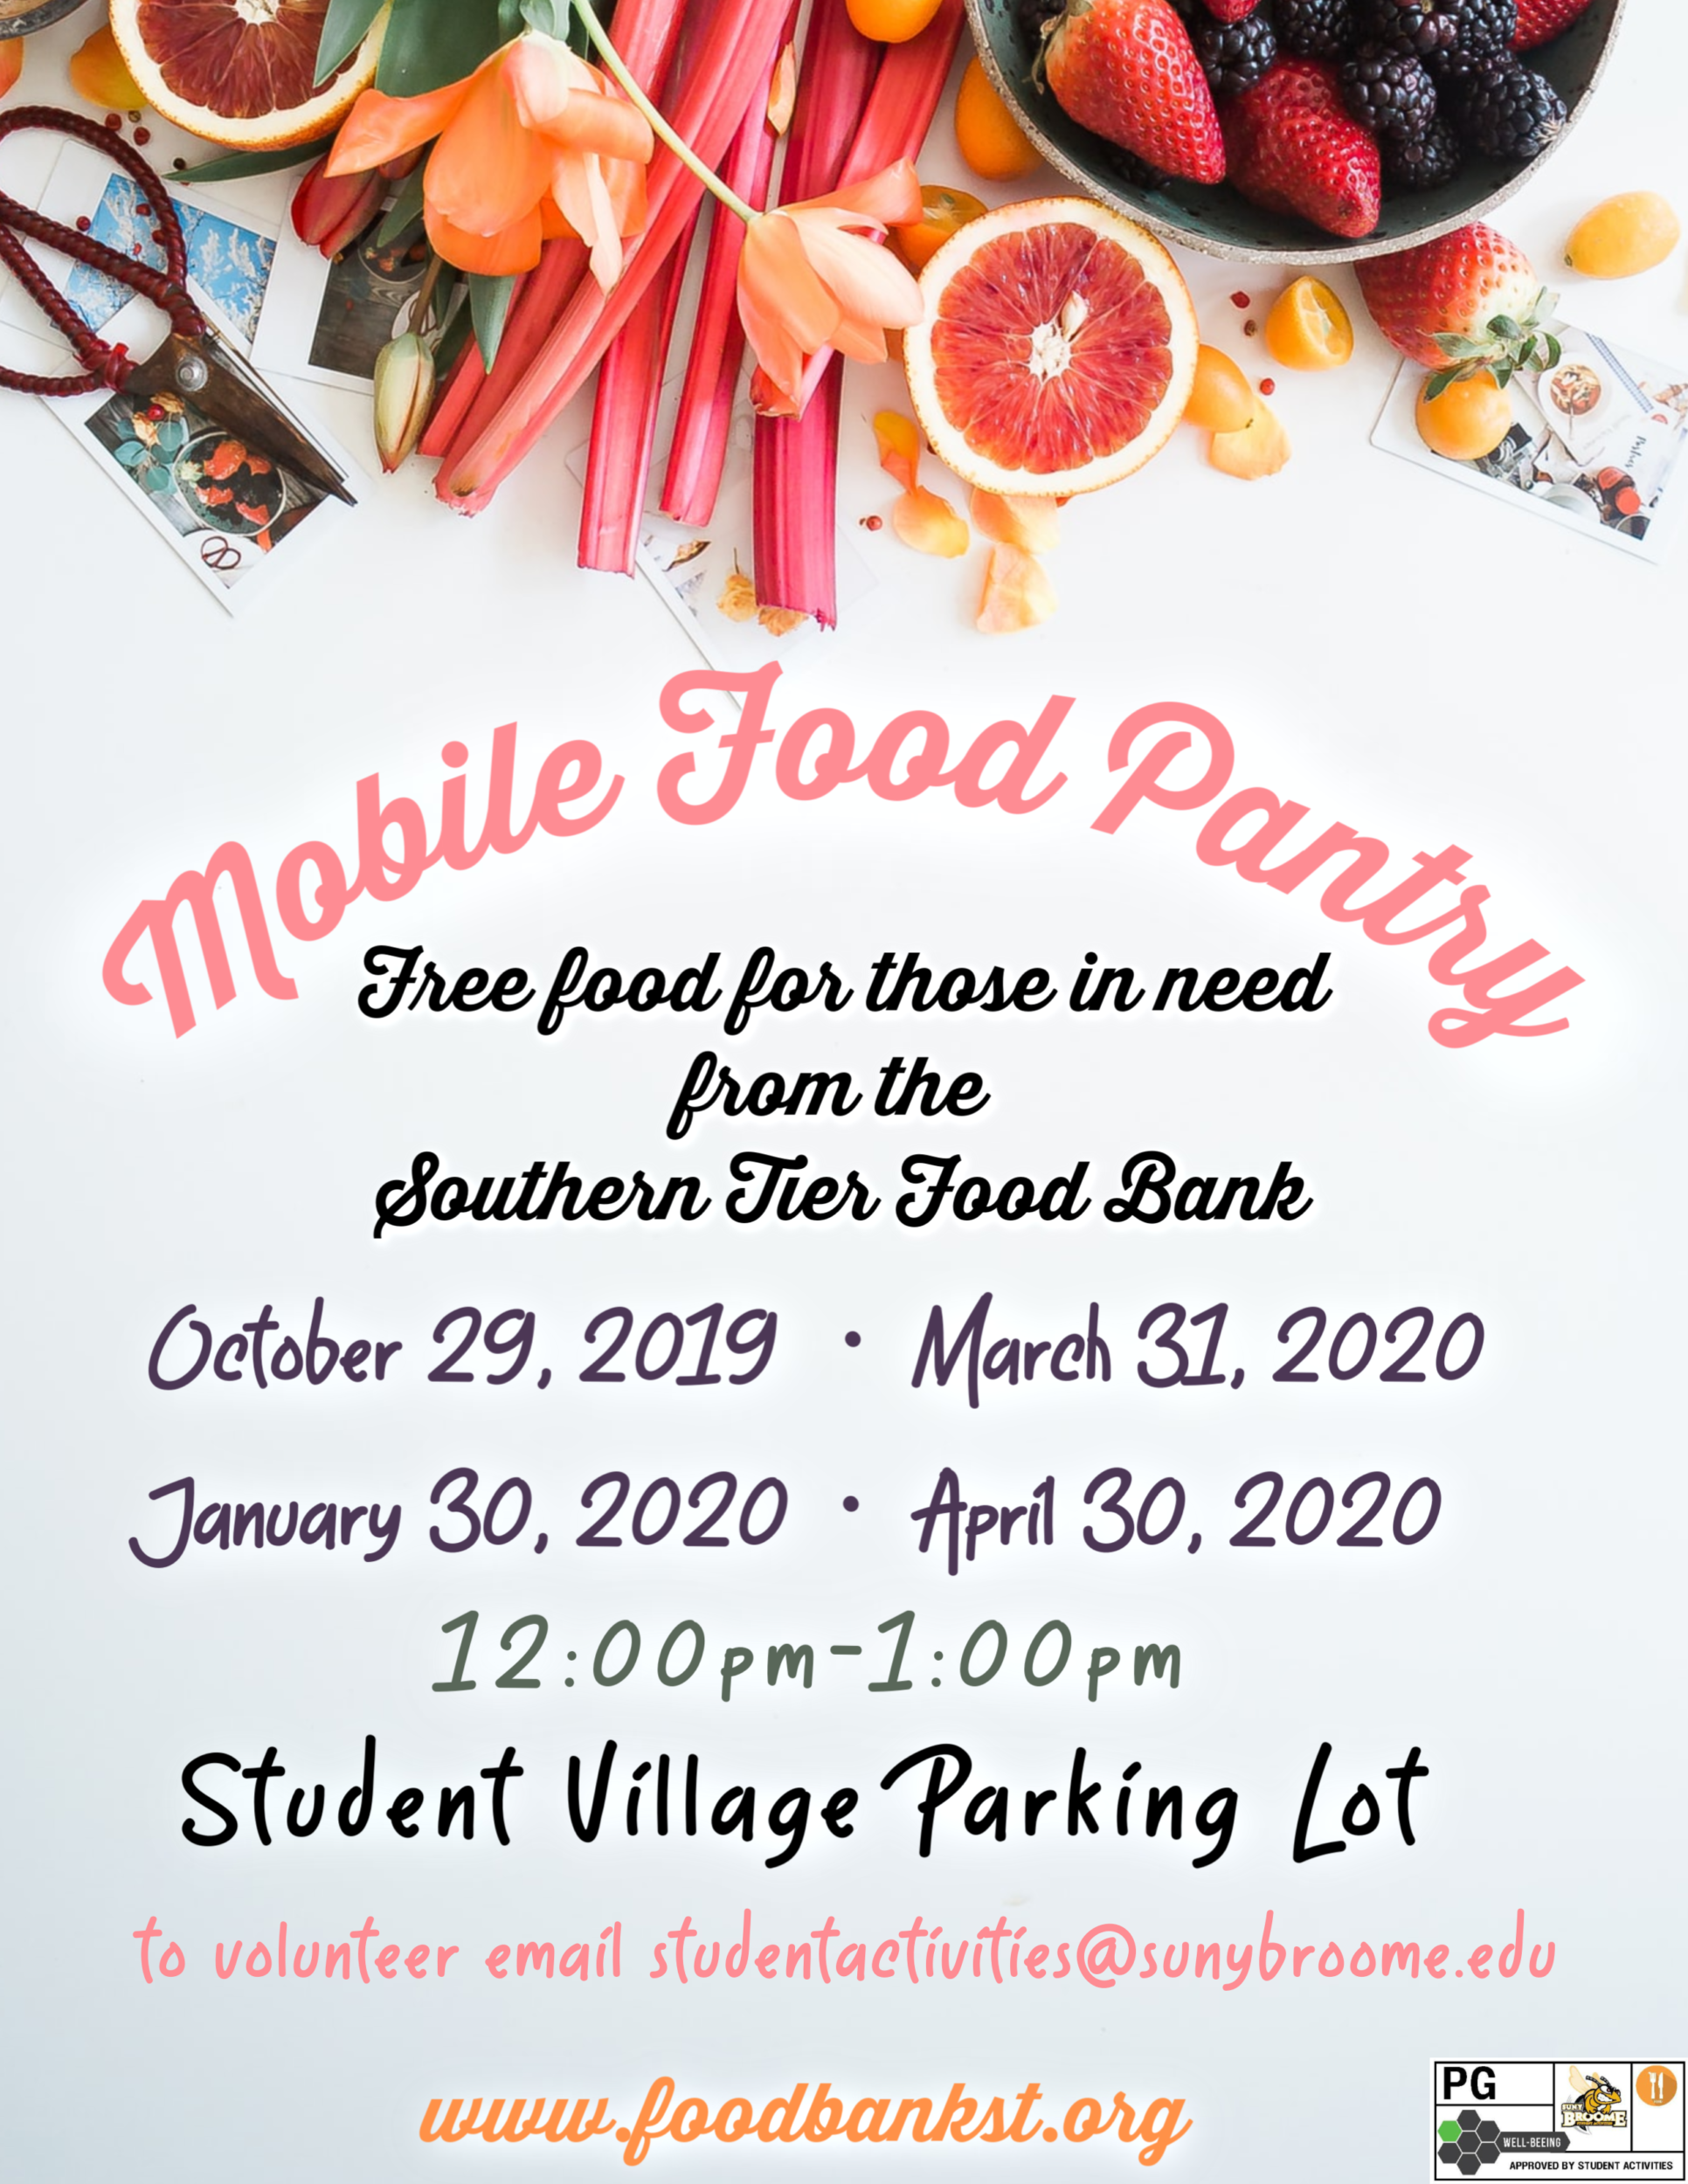 The Southern Tier Food Bank's mobile food pantry is offering free food to those in need on the following dates